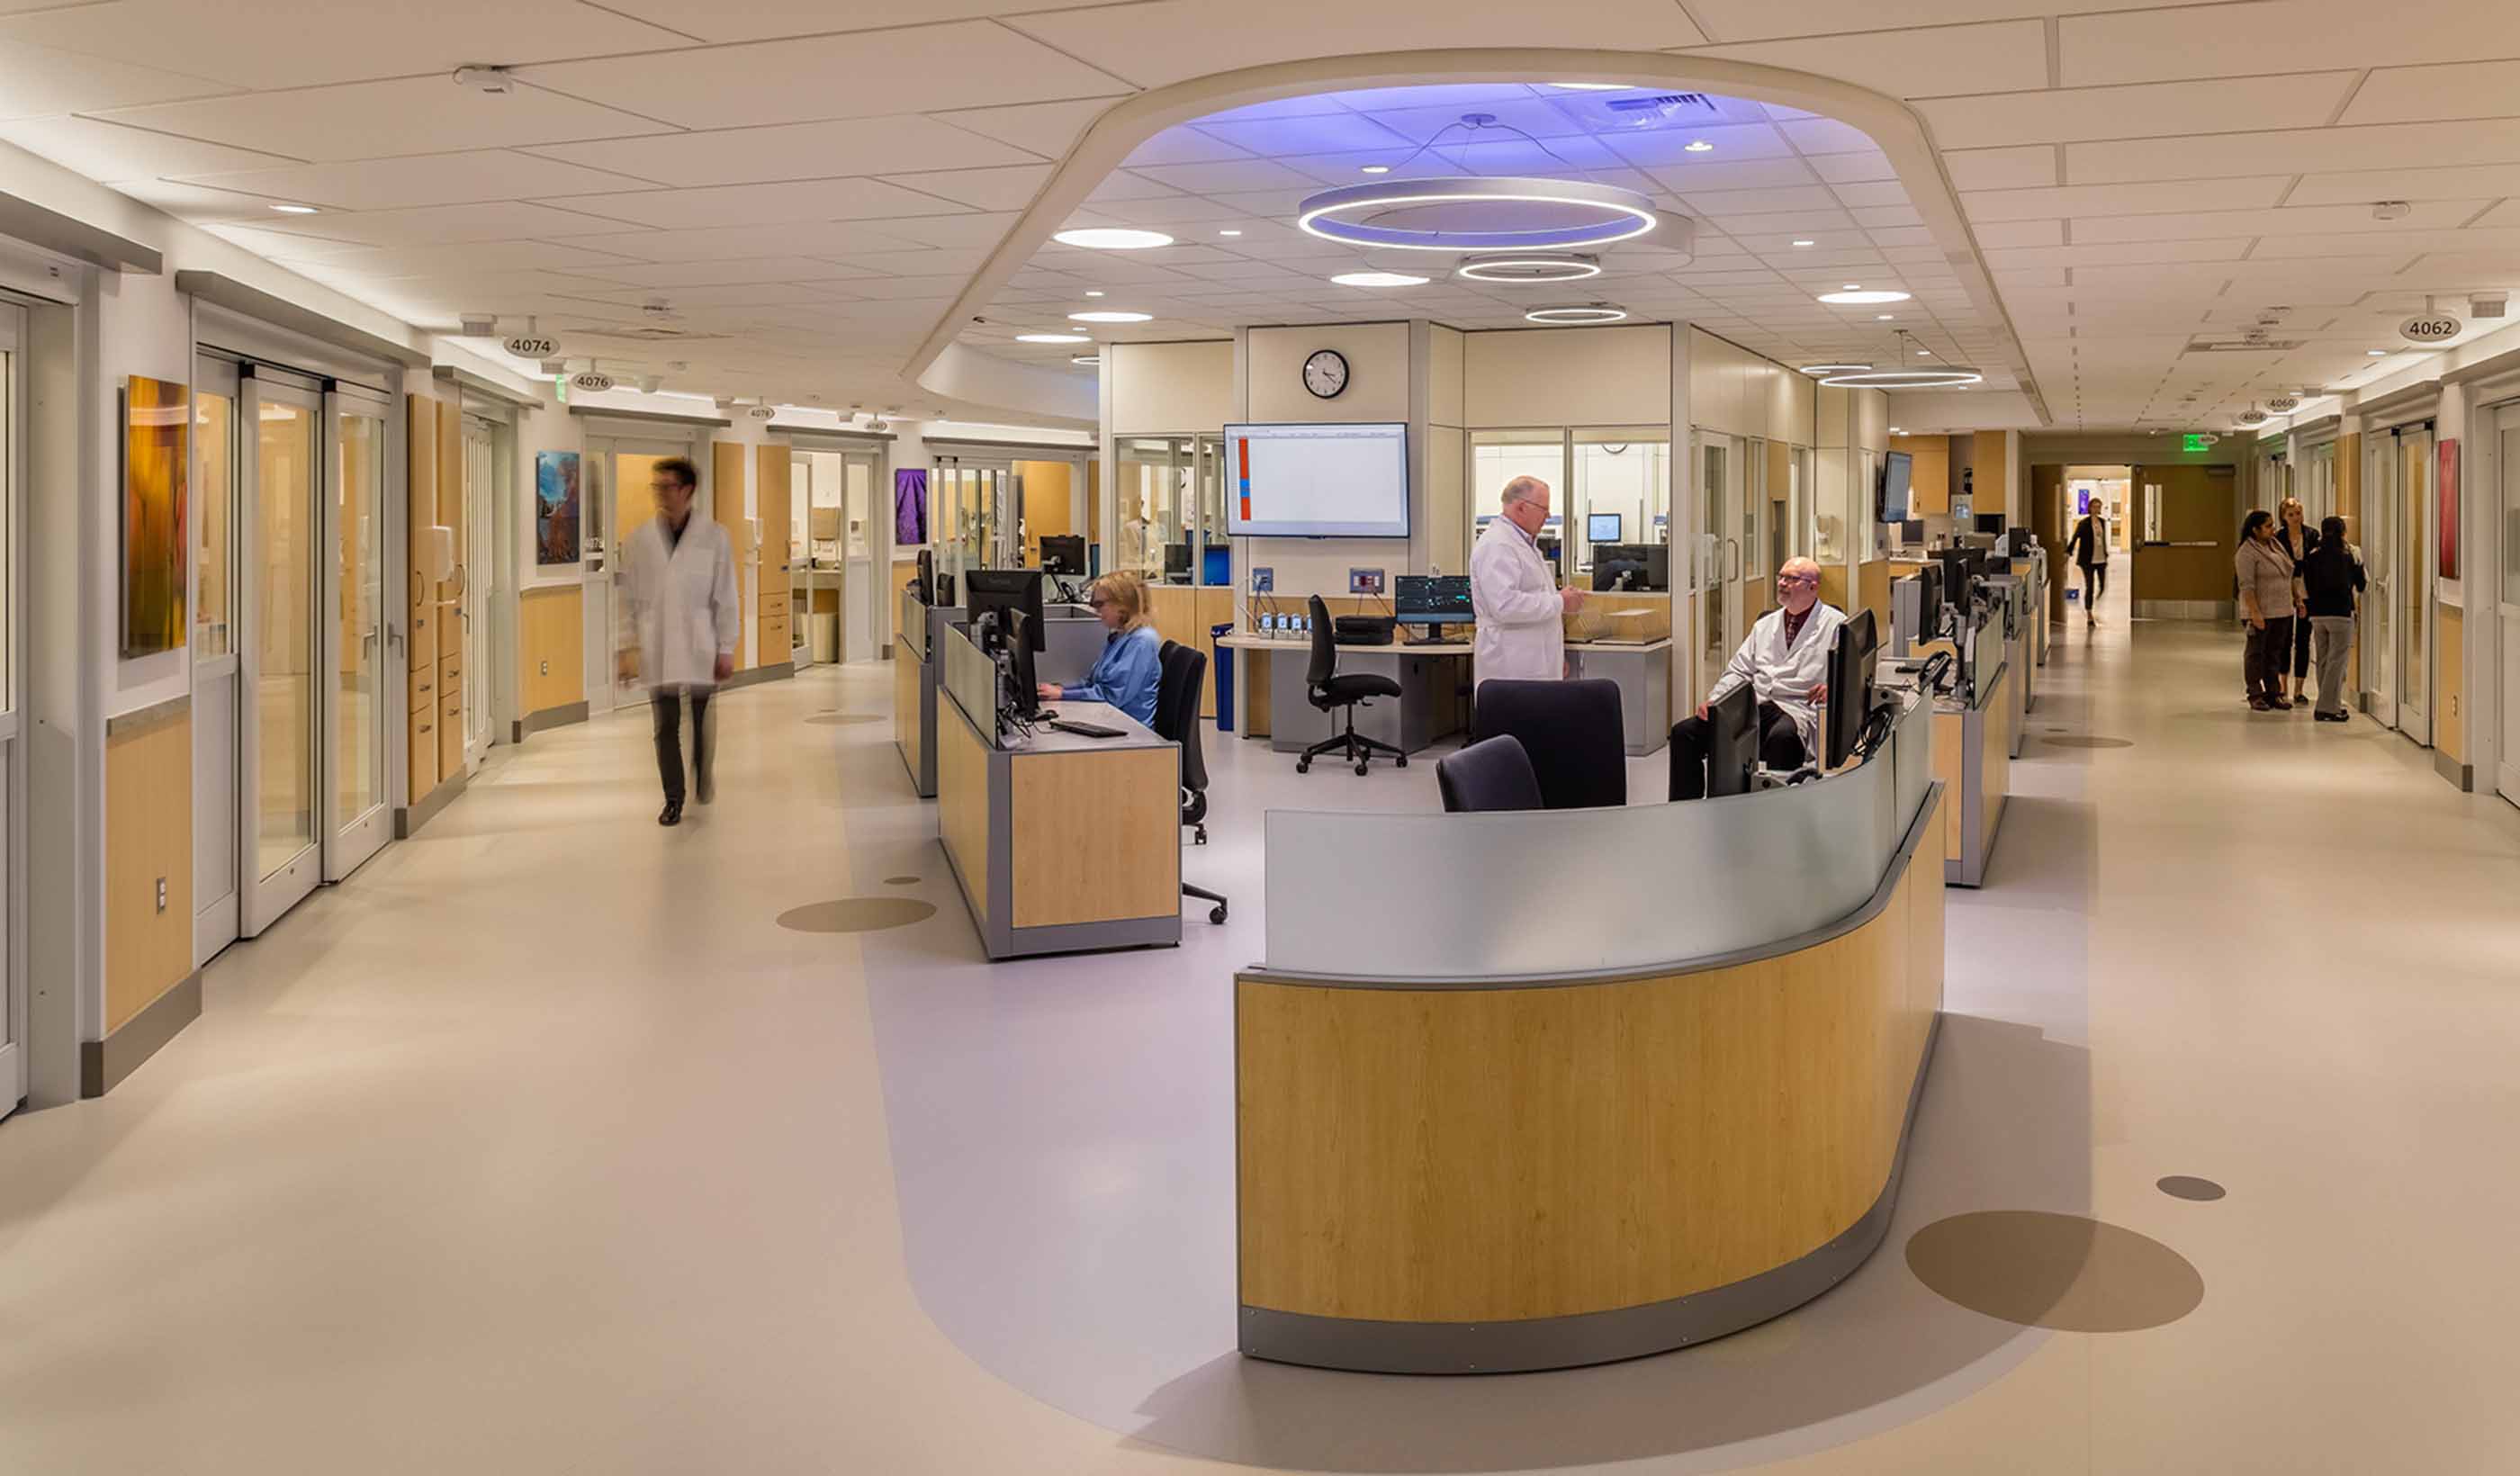 Healthy light: How to design tunable or dynamic lighting to benefit patients and staff 